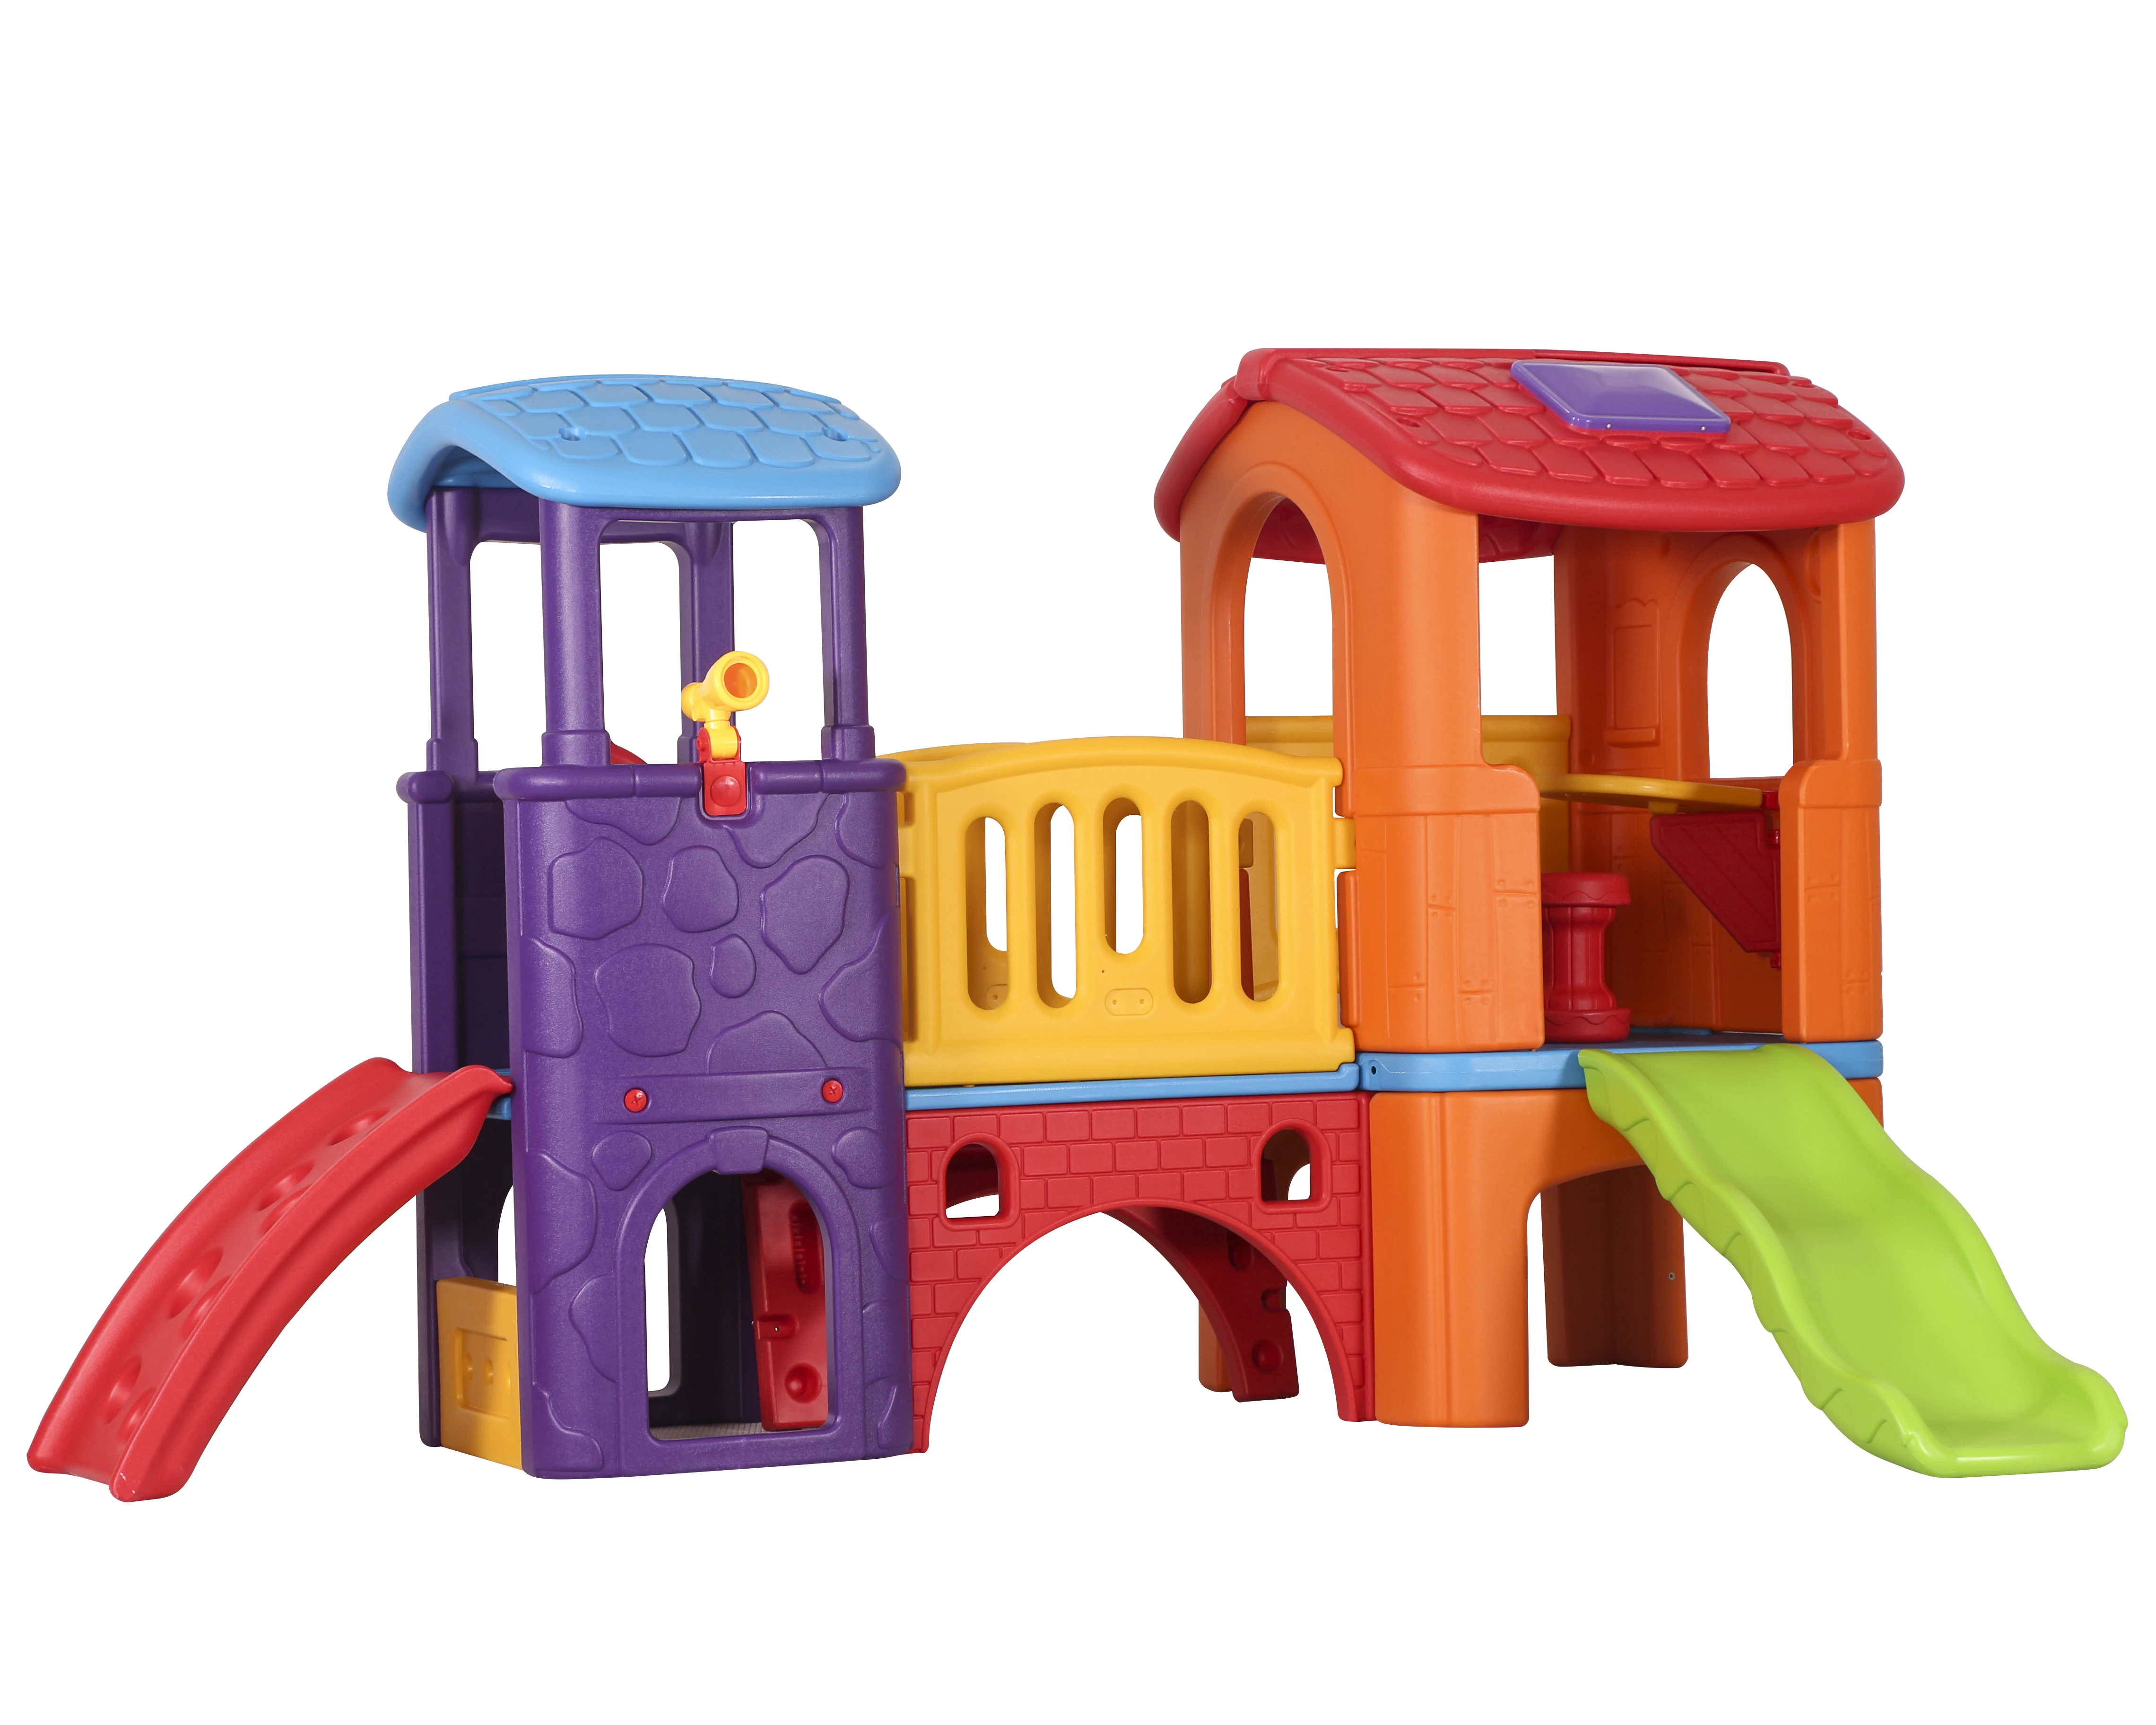 indoor and outdoor plastic combination playground kids playhouse with slide